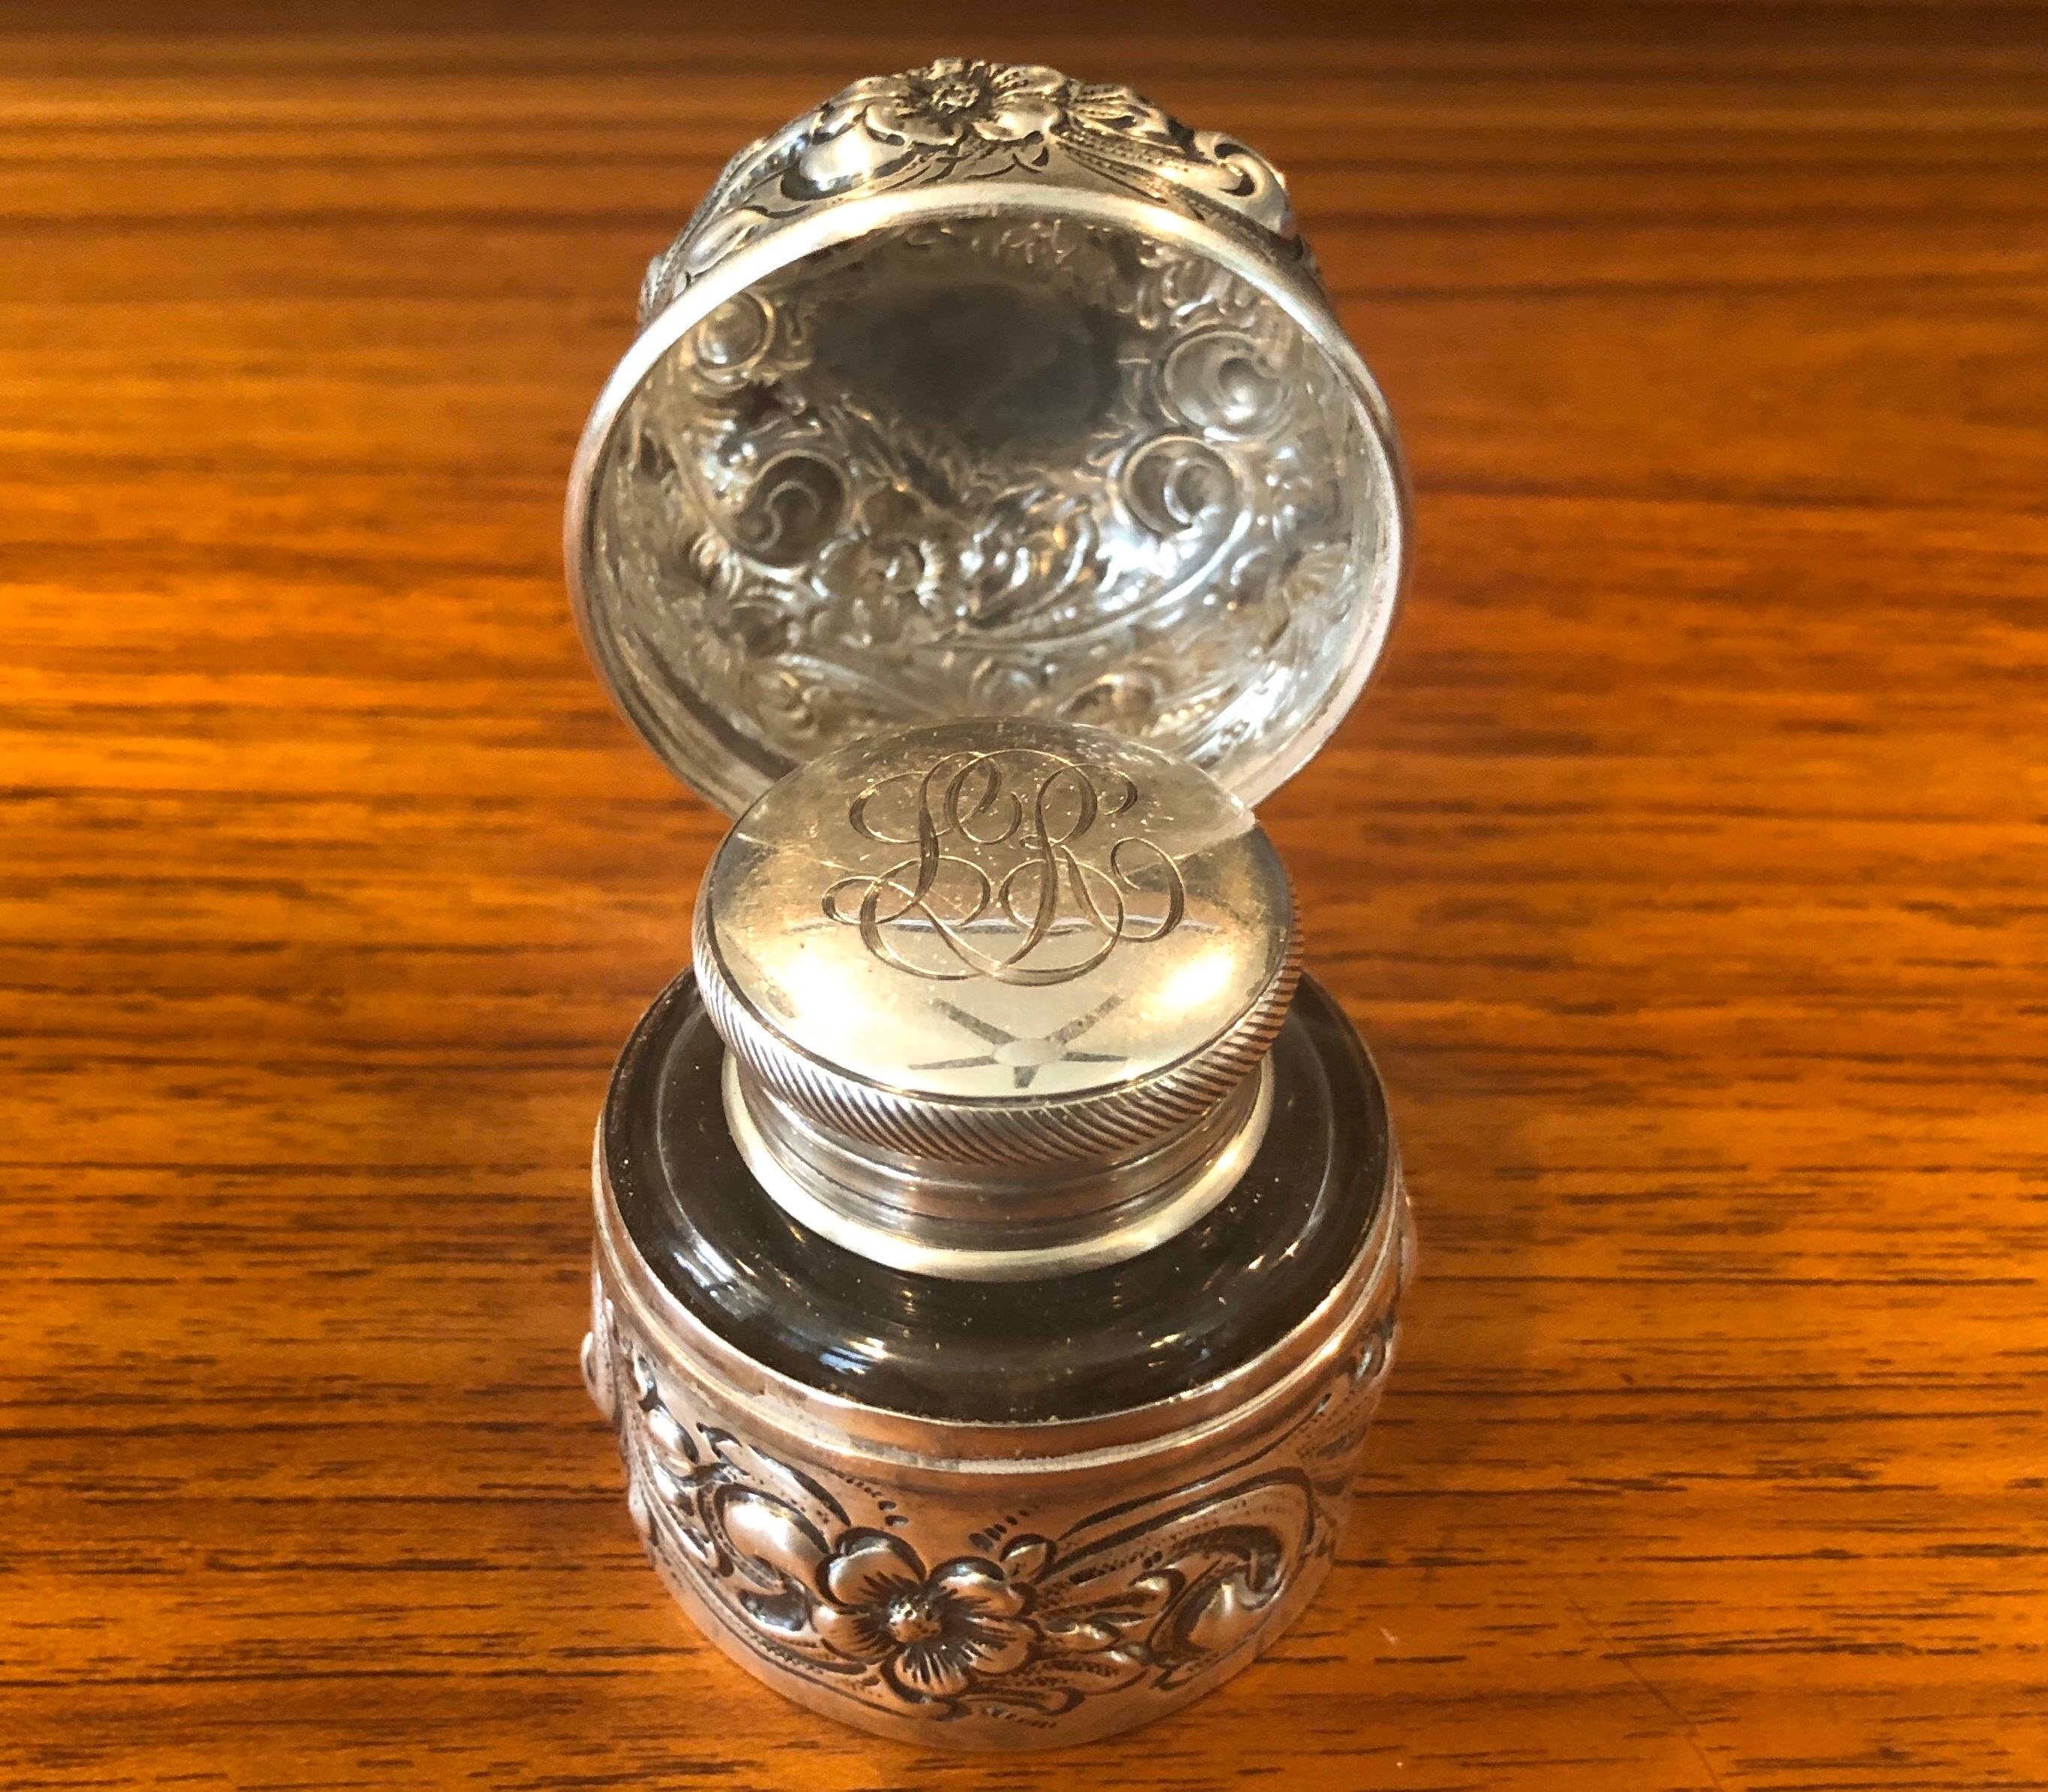 Repoussé Antique Repousse Sterling Inkwell by Howard & Co. For Sale